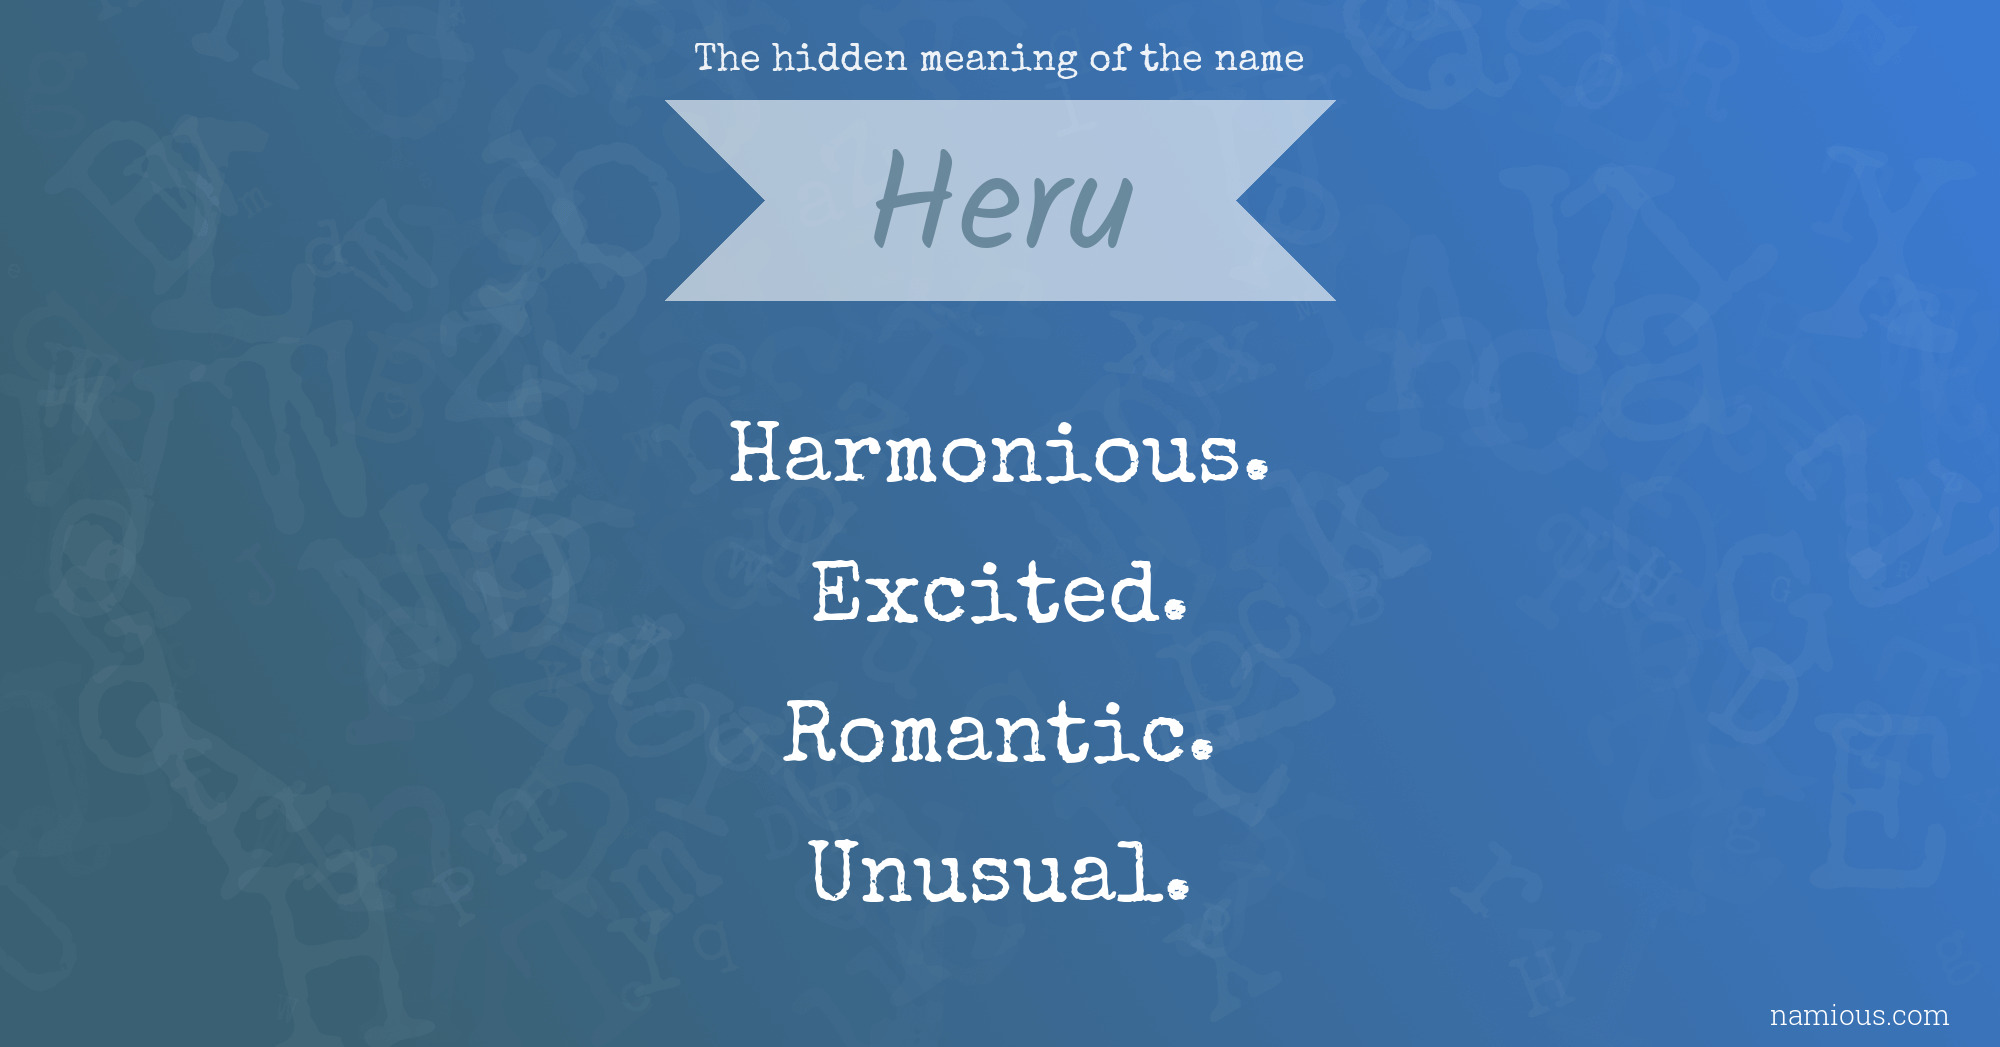 The hidden meaning of the name Heru